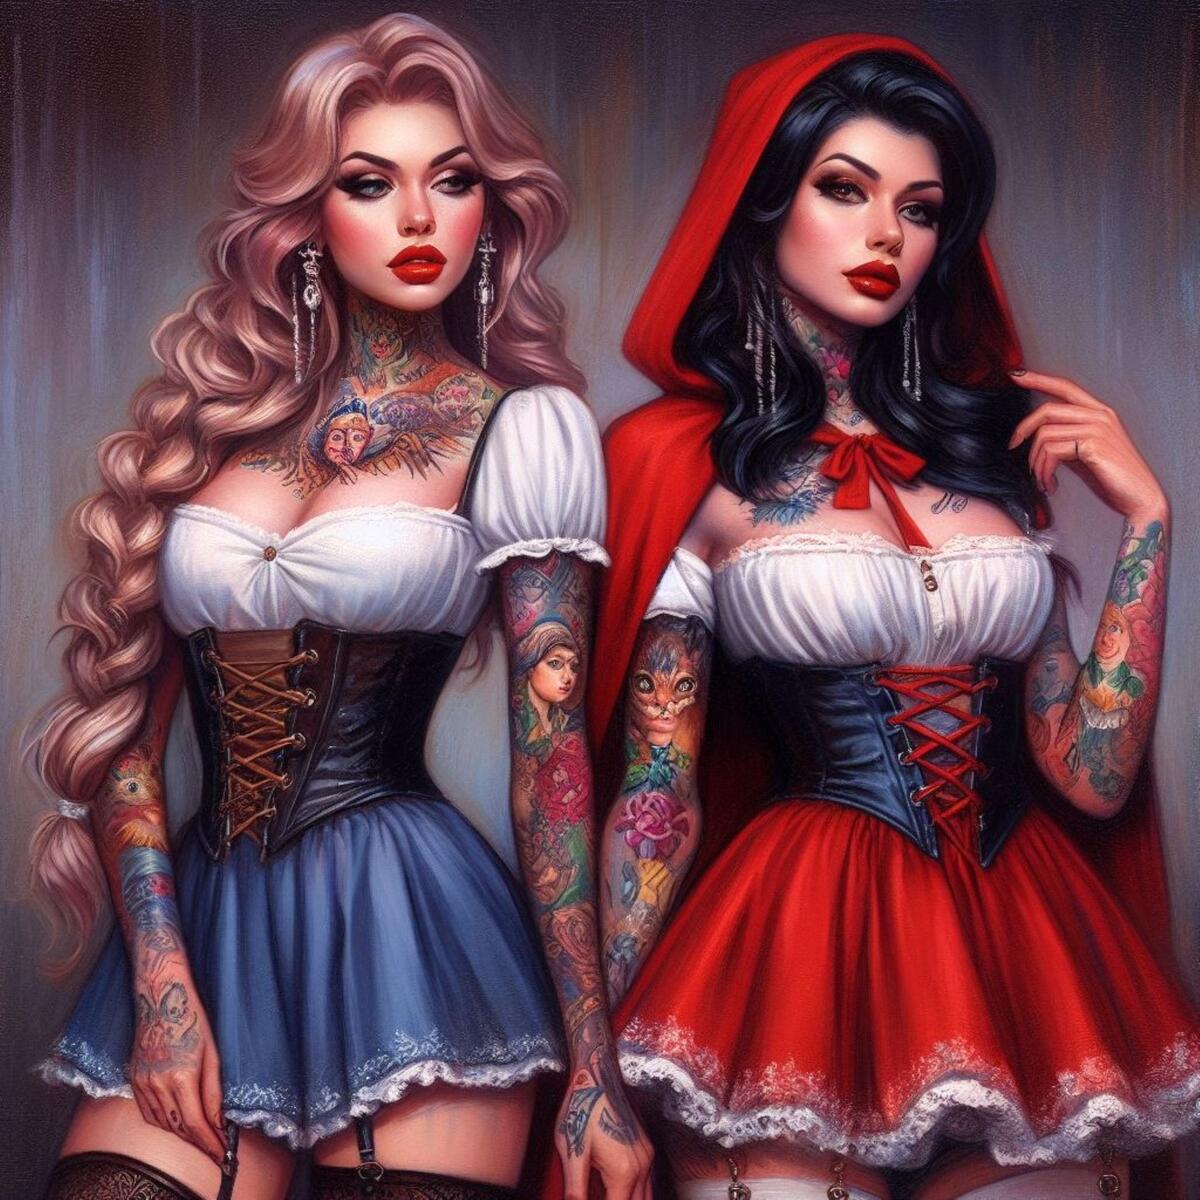 Girlfriends with tattoos